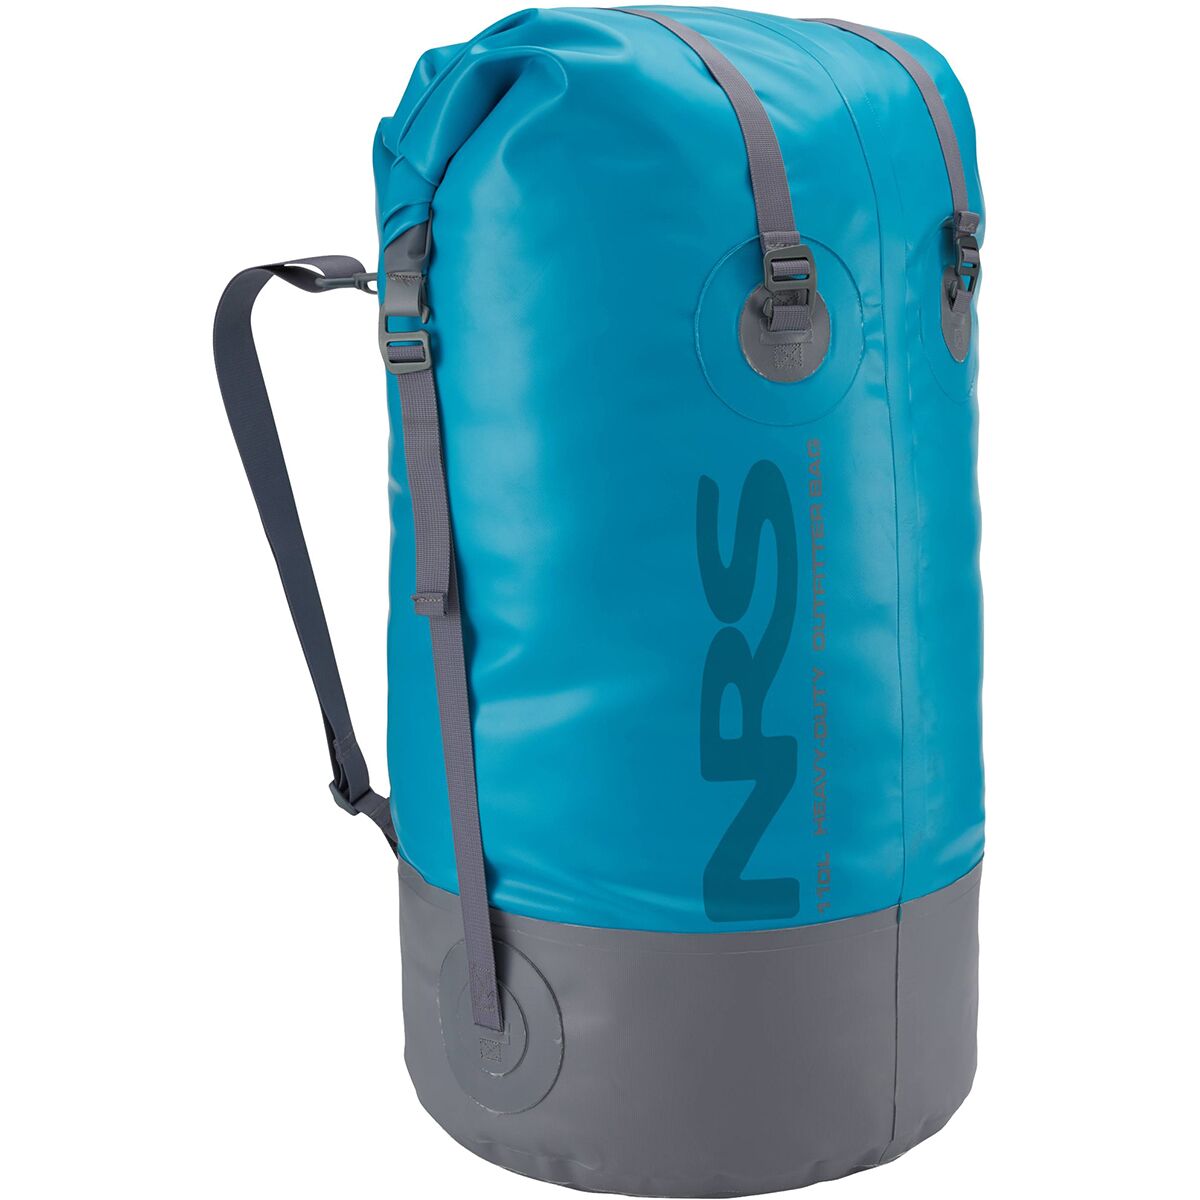 NRS Heavy-Duty Outfitter Dry Bag